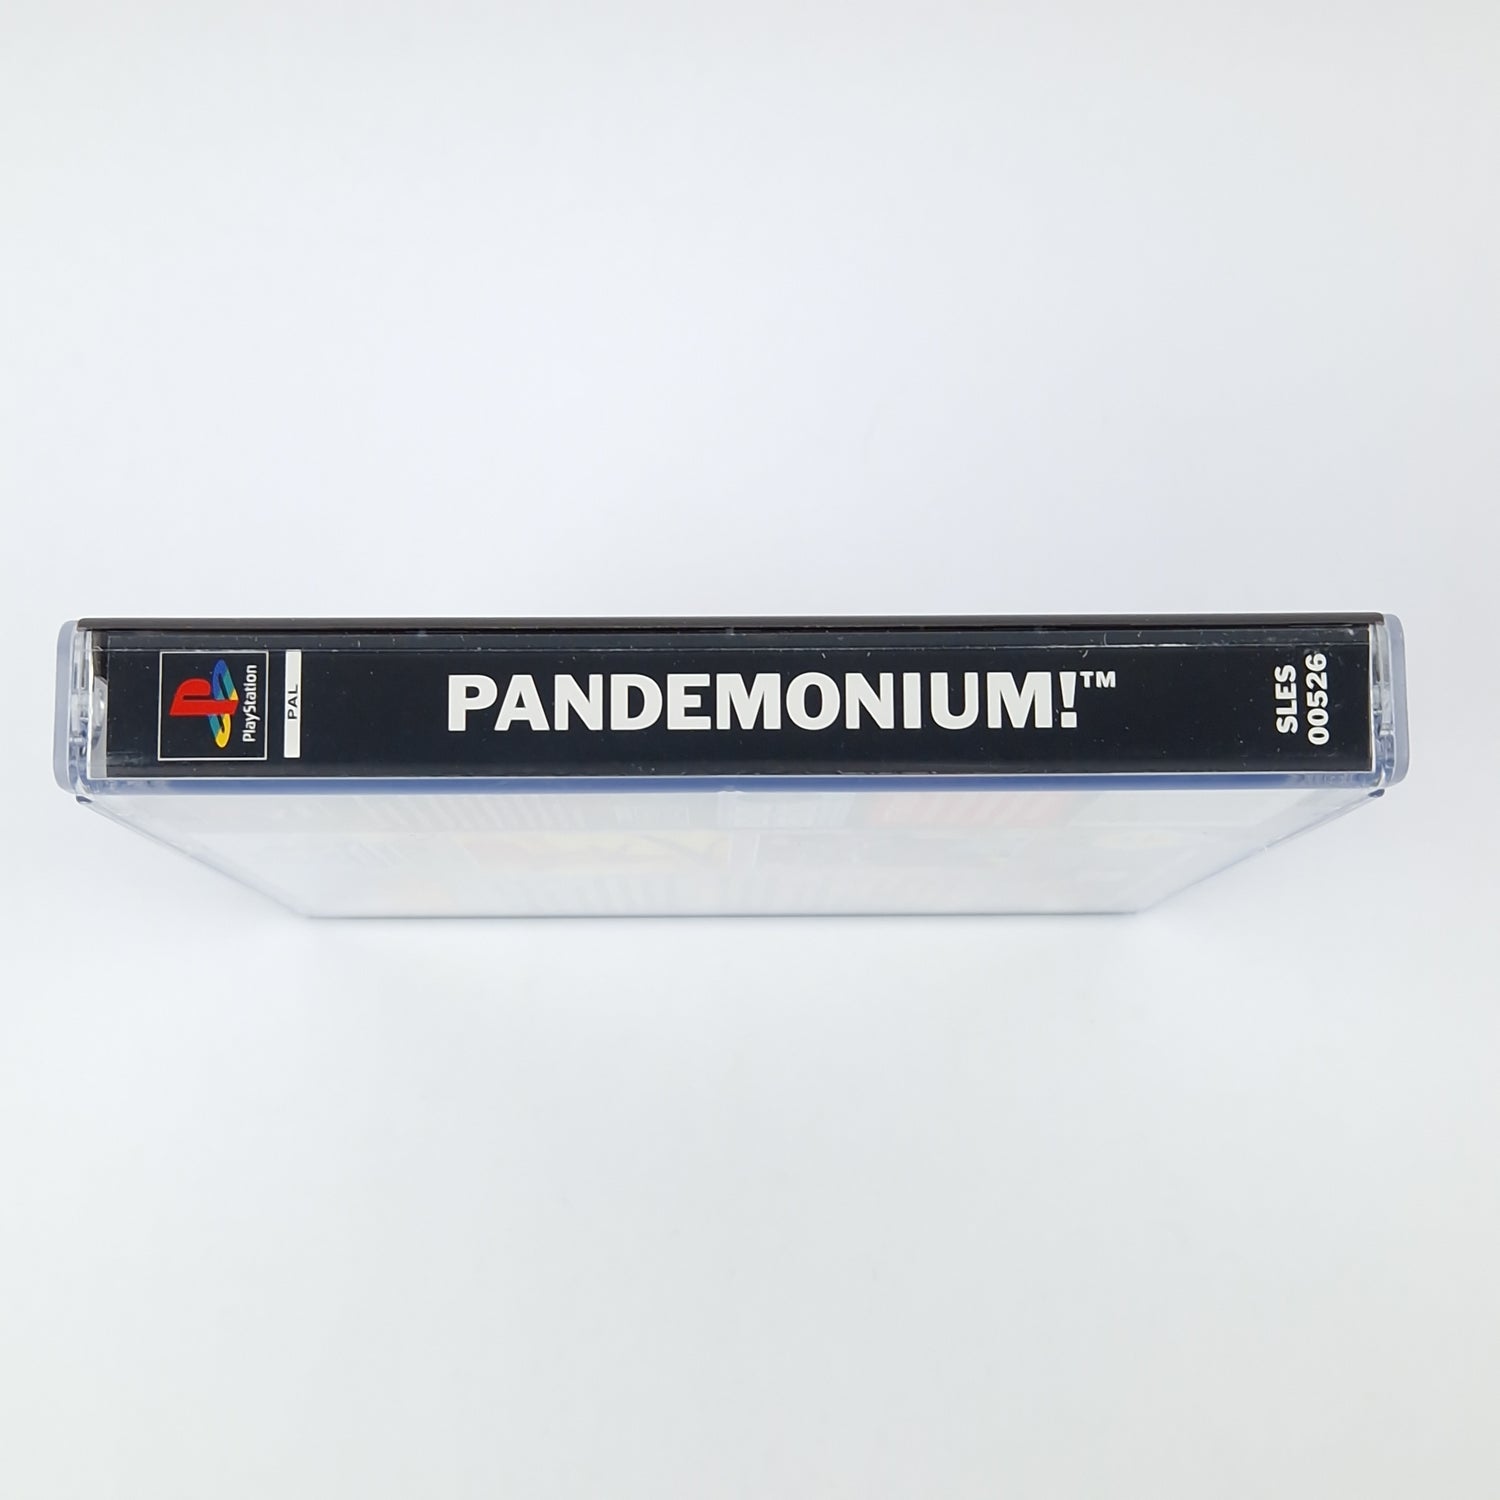 Playstation 1 game: Pandemonium! - CD instructions OVP | SONY PS1 PSX PAL